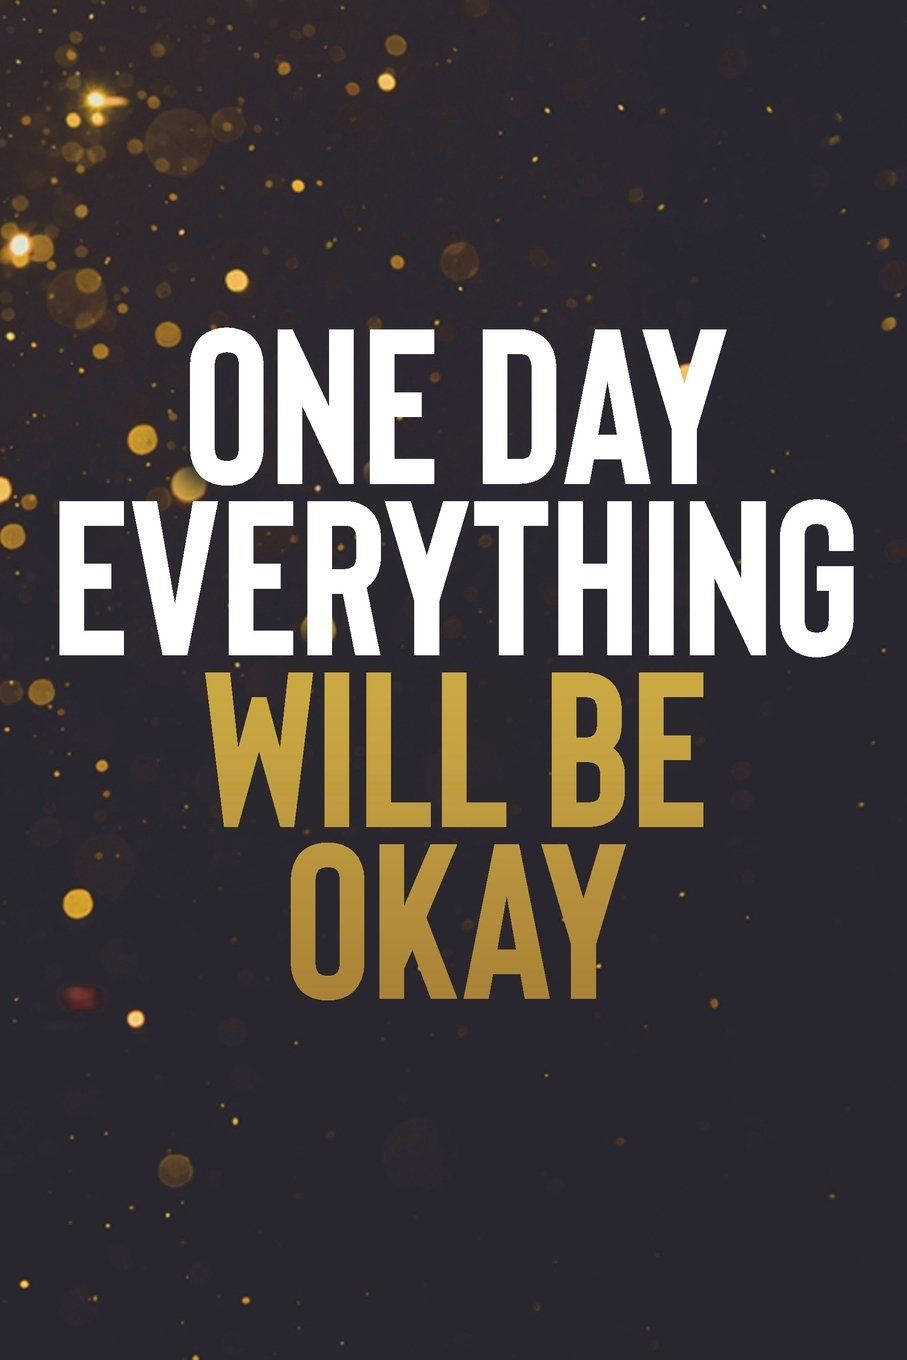 One Day Everything Will Be Okay Wallpaper